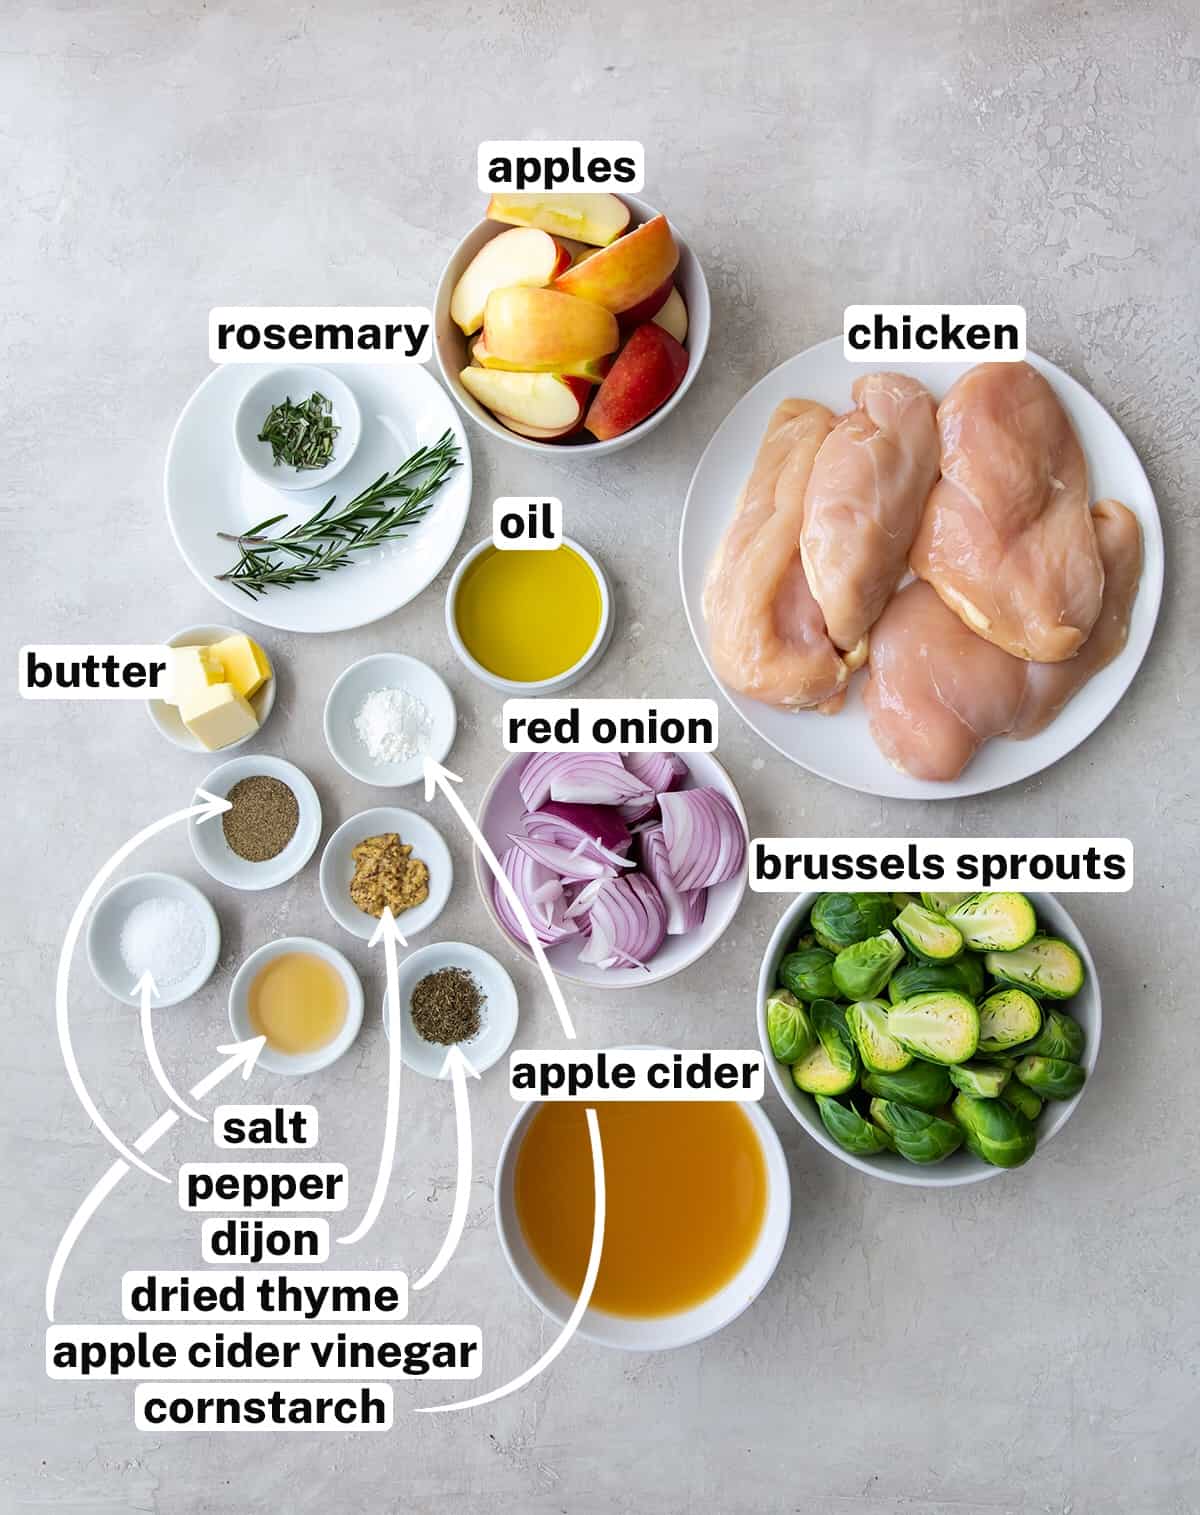 The ingredients for Apple Cider Chicken with overlay text.